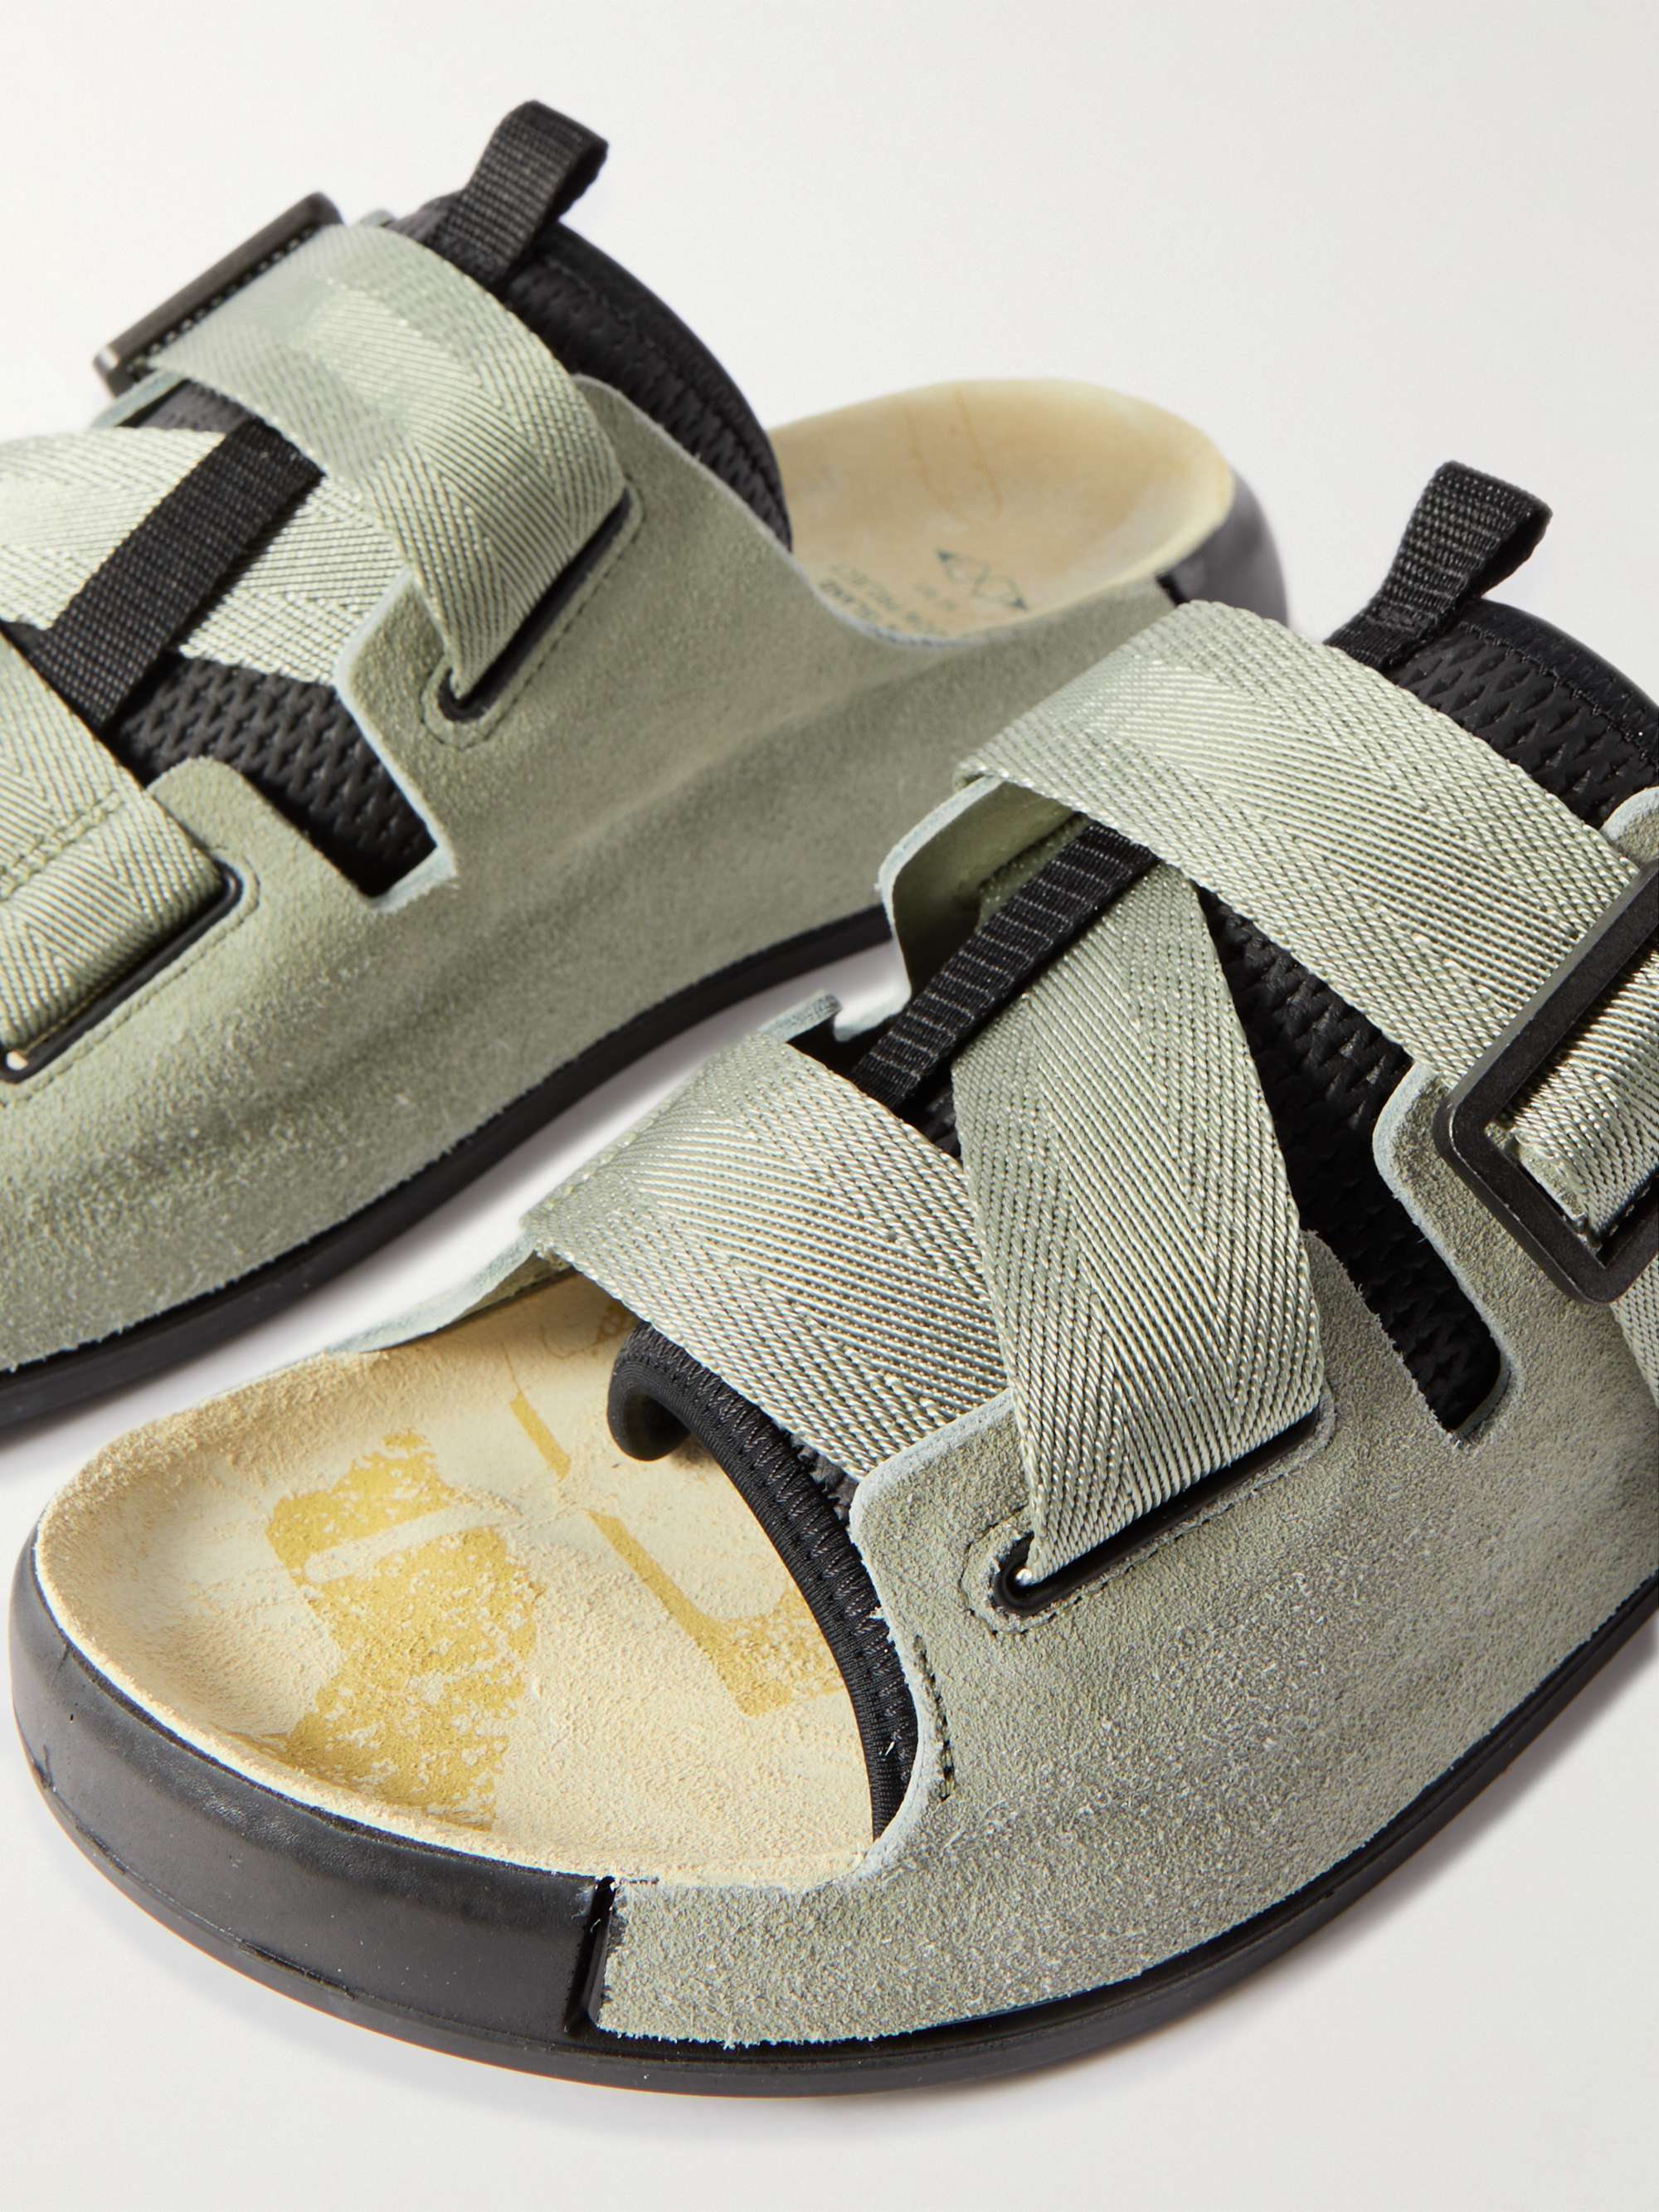 STONE ISLAND SHADOW PROJECT Suede and Mesh Sandals | MR PORTER